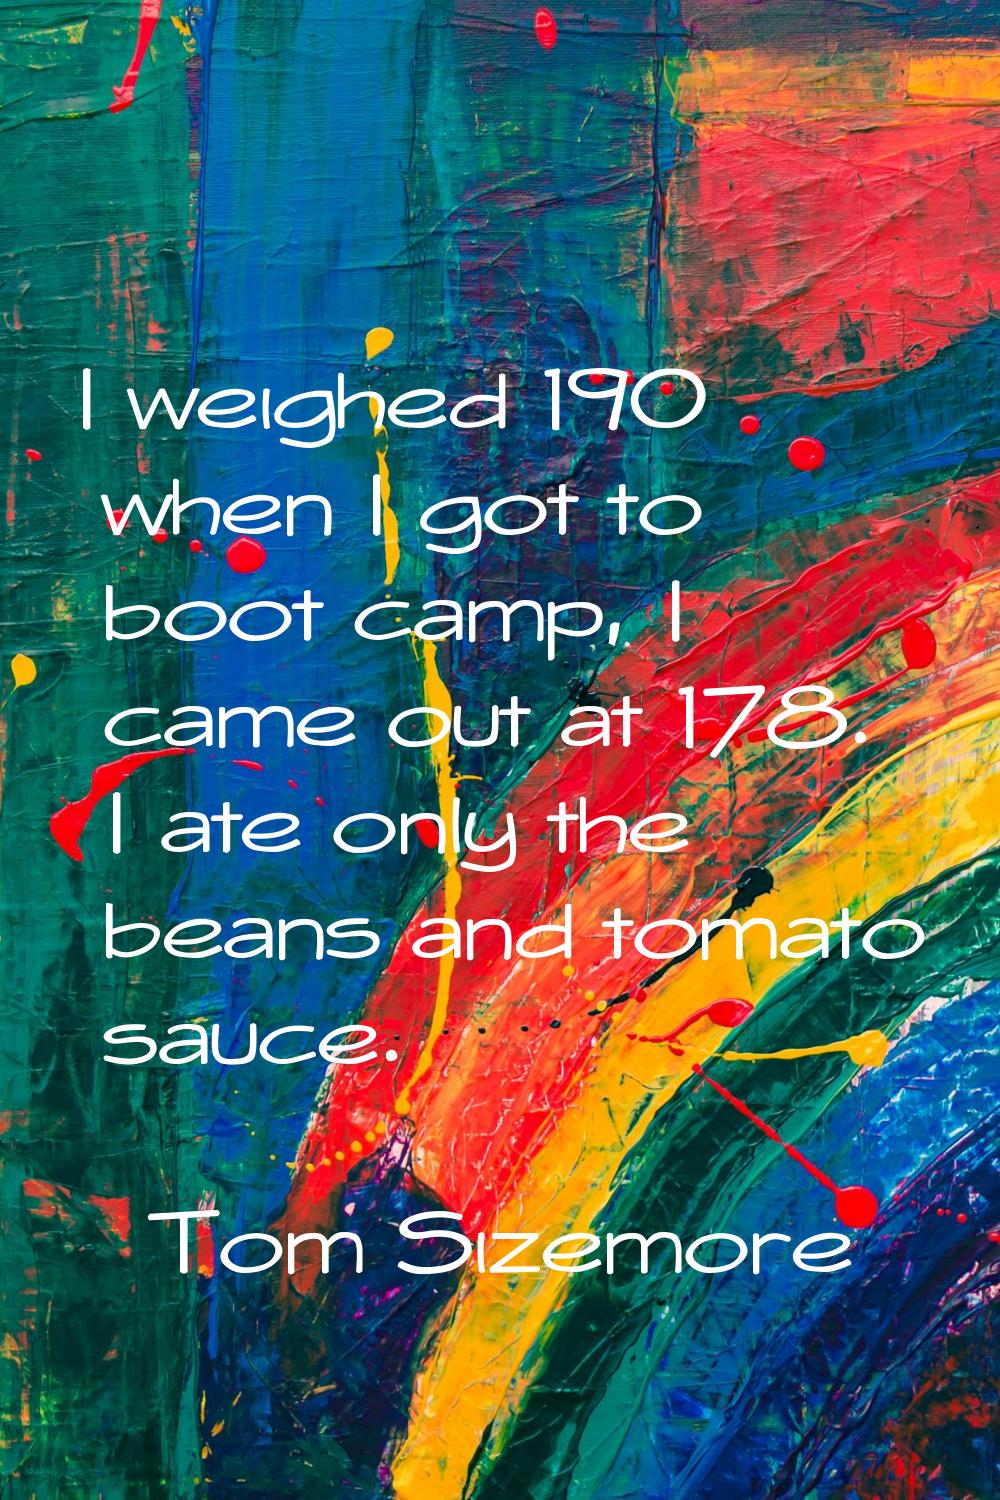 I weighed 190 when I got to boot camp, I came out at 178. I ate only the beans and tomato sauce.